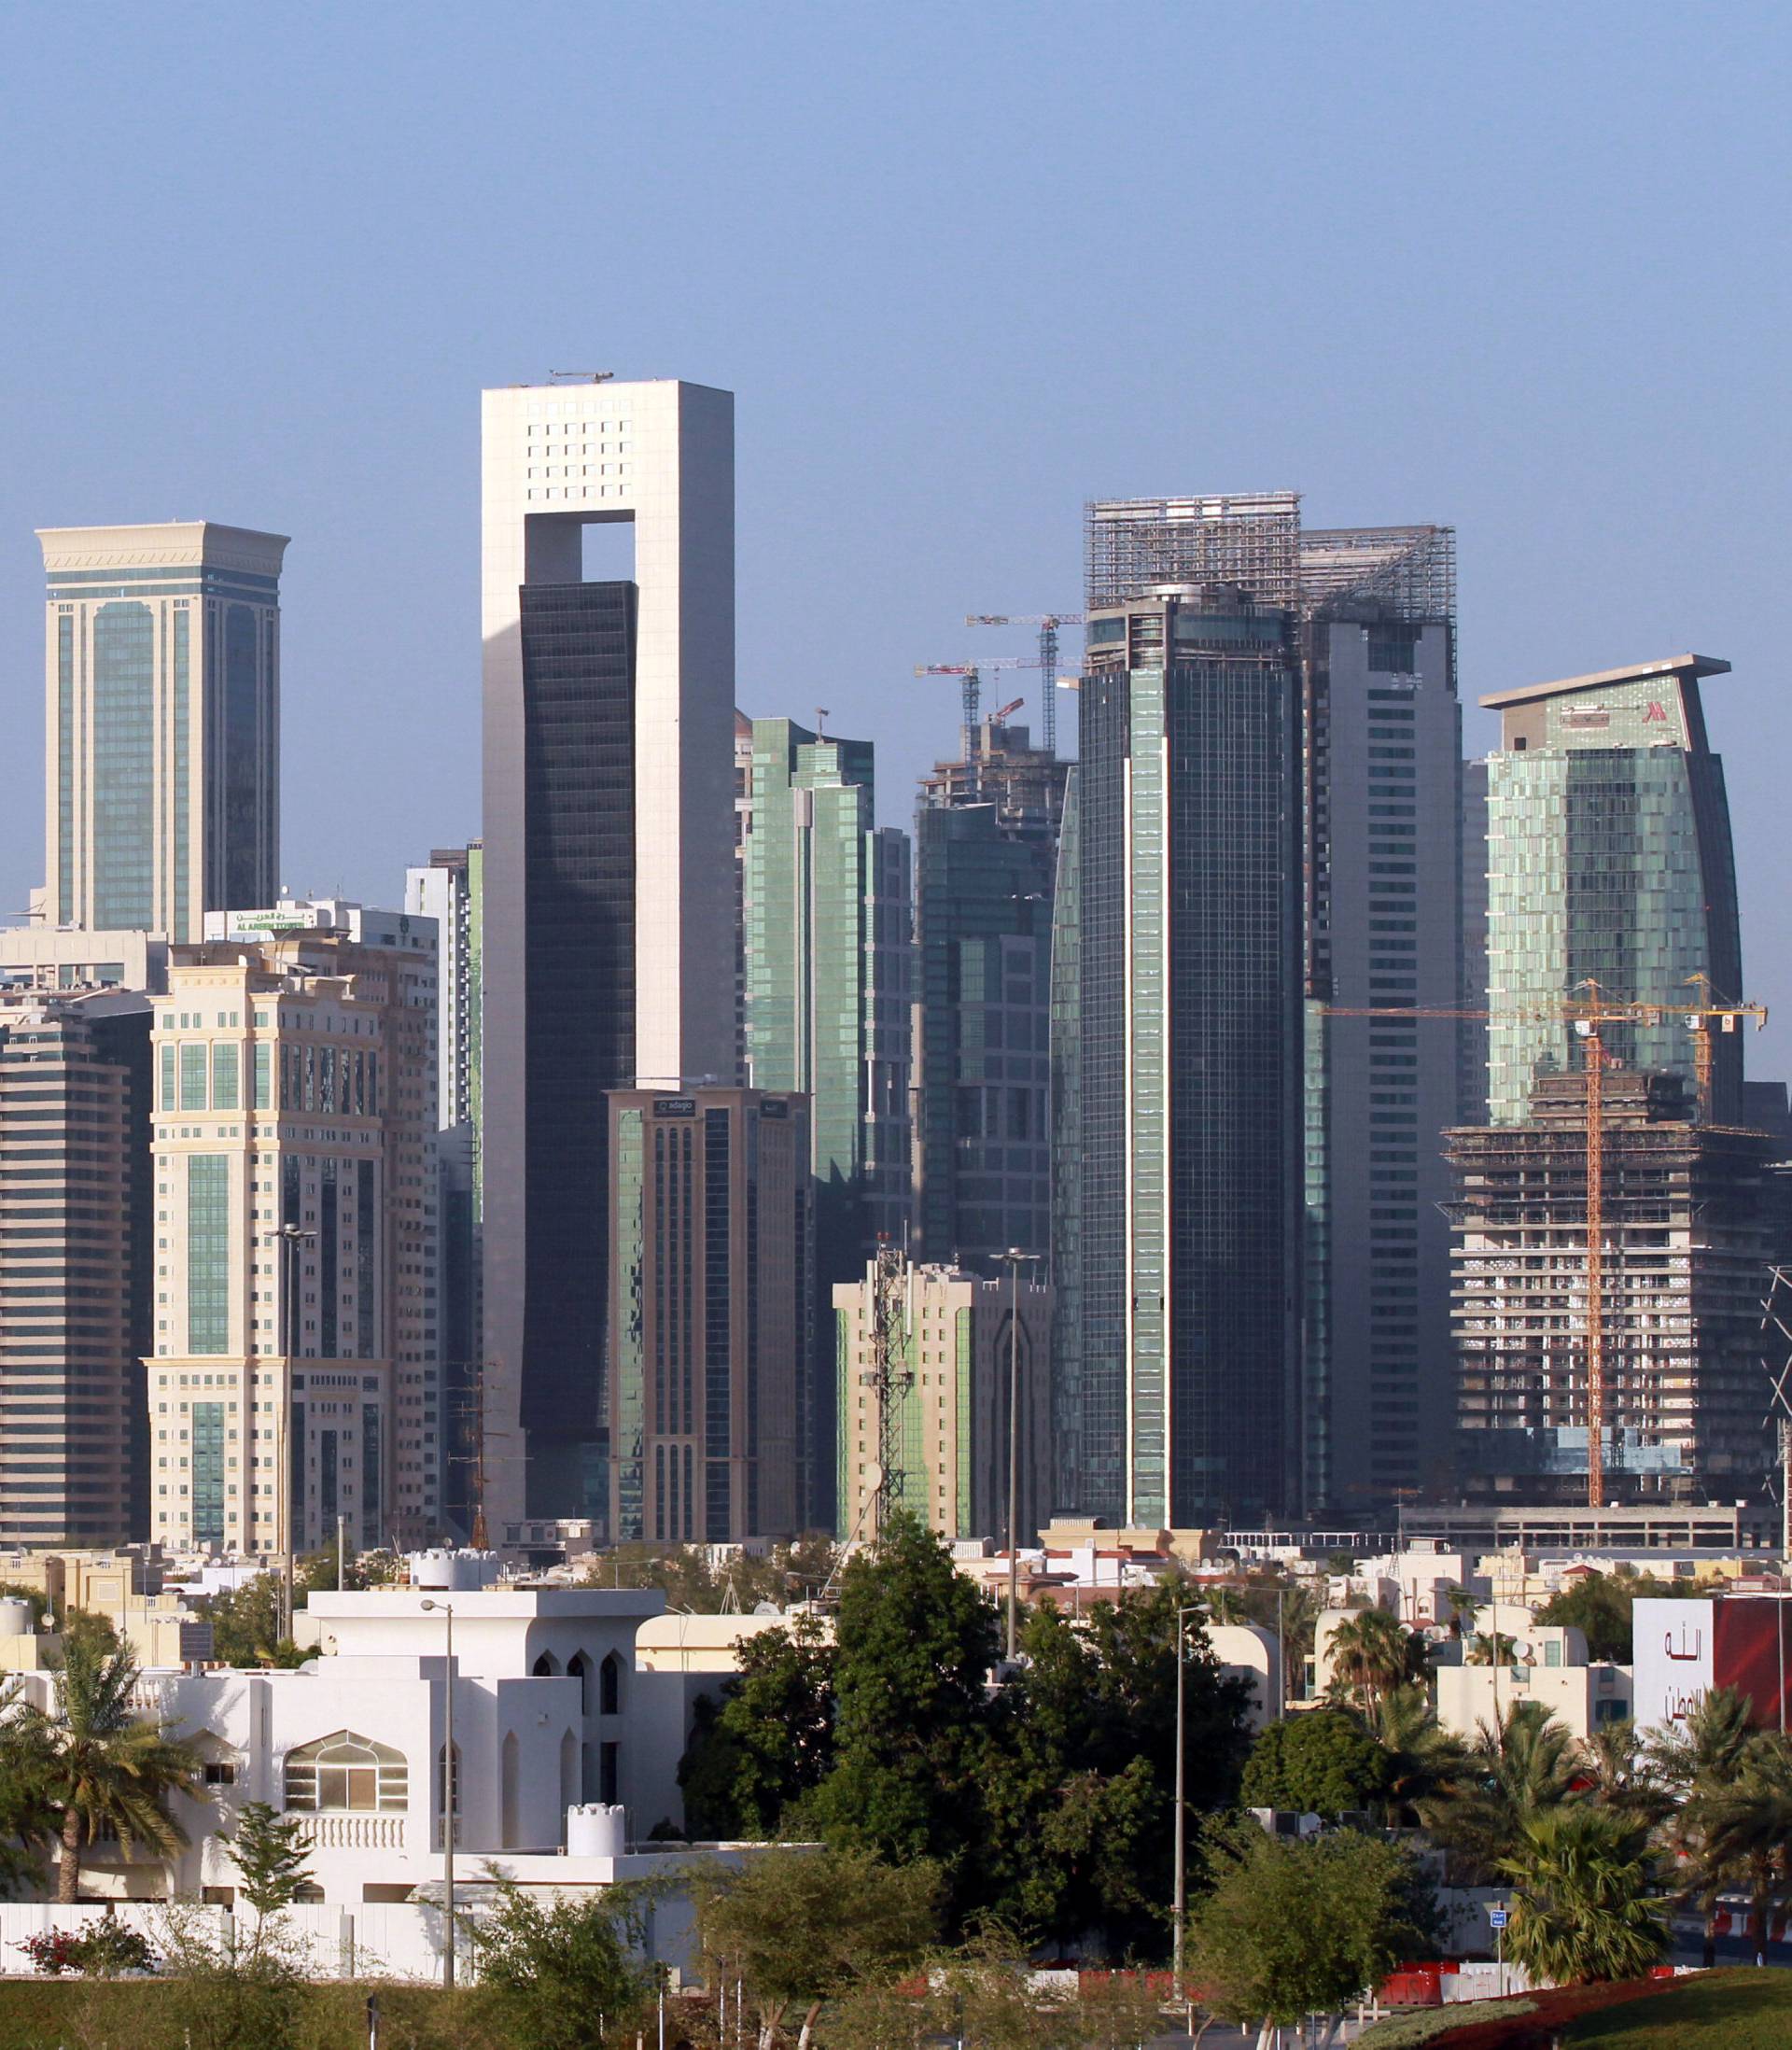 View shows buildings in Doha